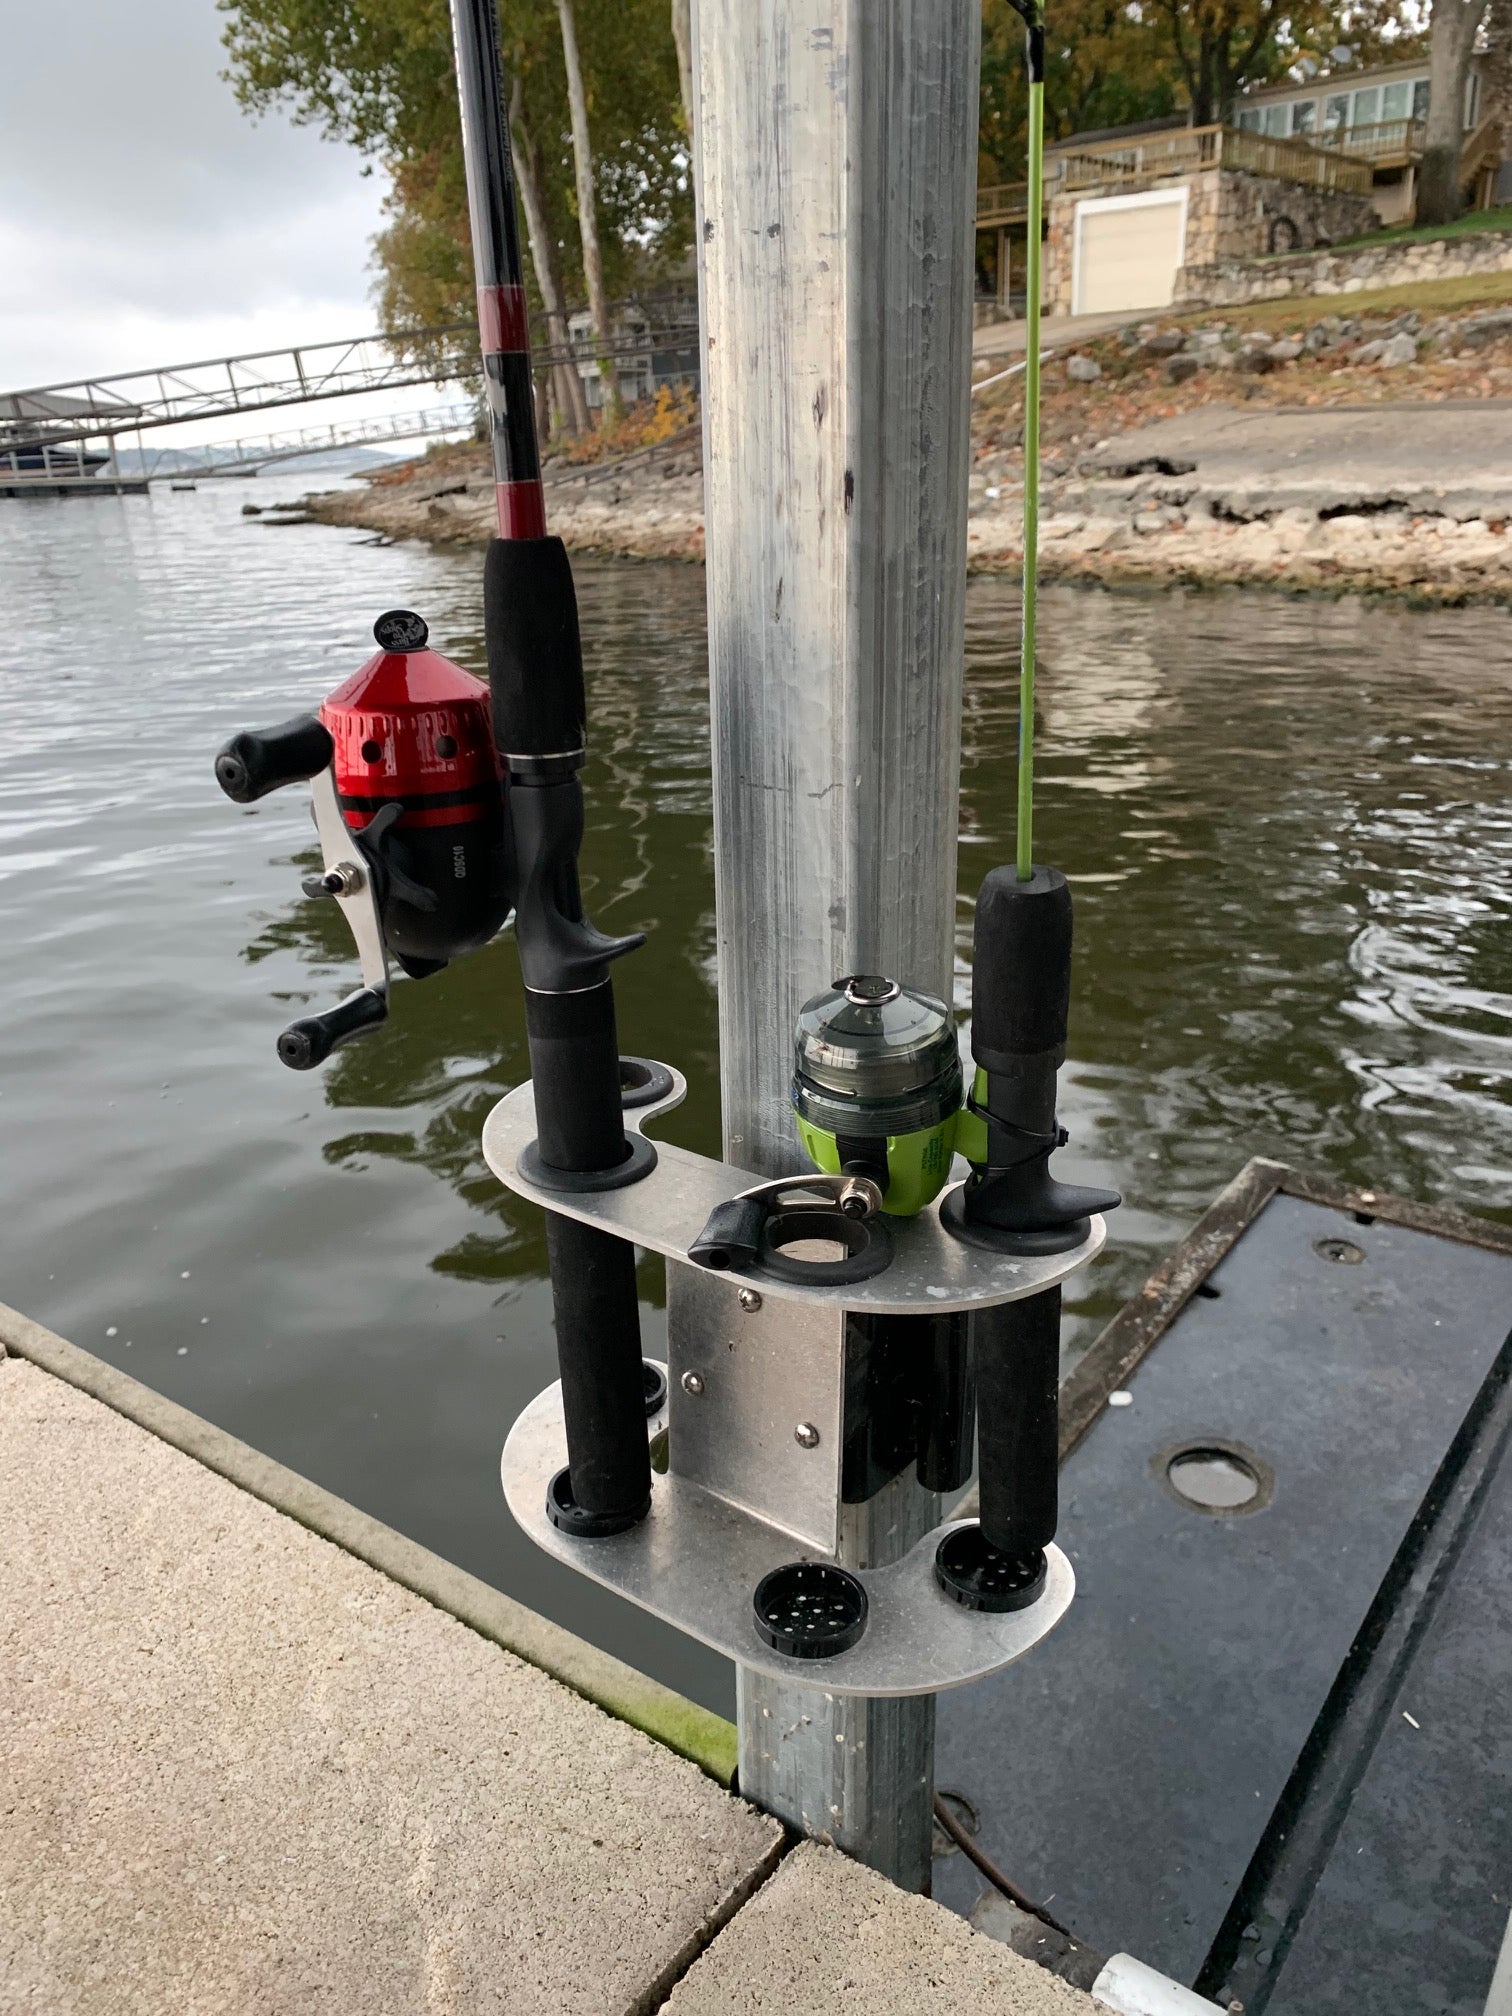 Dock Essentials provides a variety of products to make your boat dock  safer, more organized and convenient. - fishing-pole-holder -  fishing-pole-holder